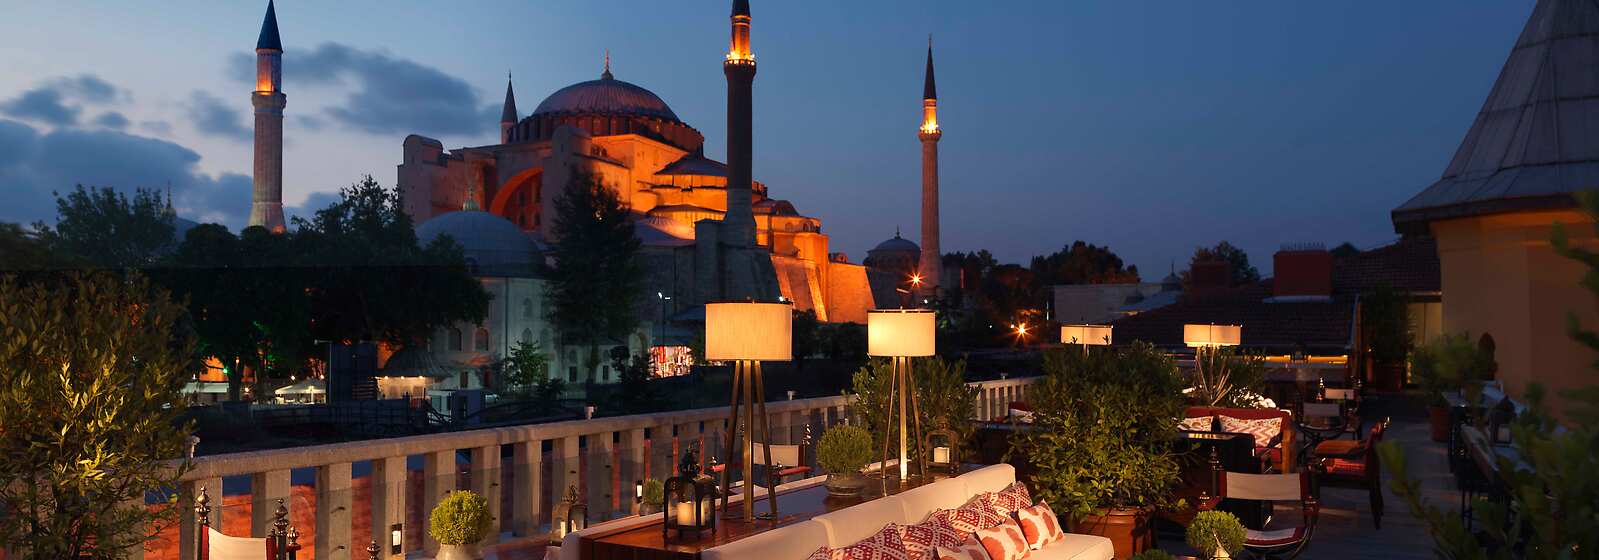 An intimate oasis in Istanbul's oldest district